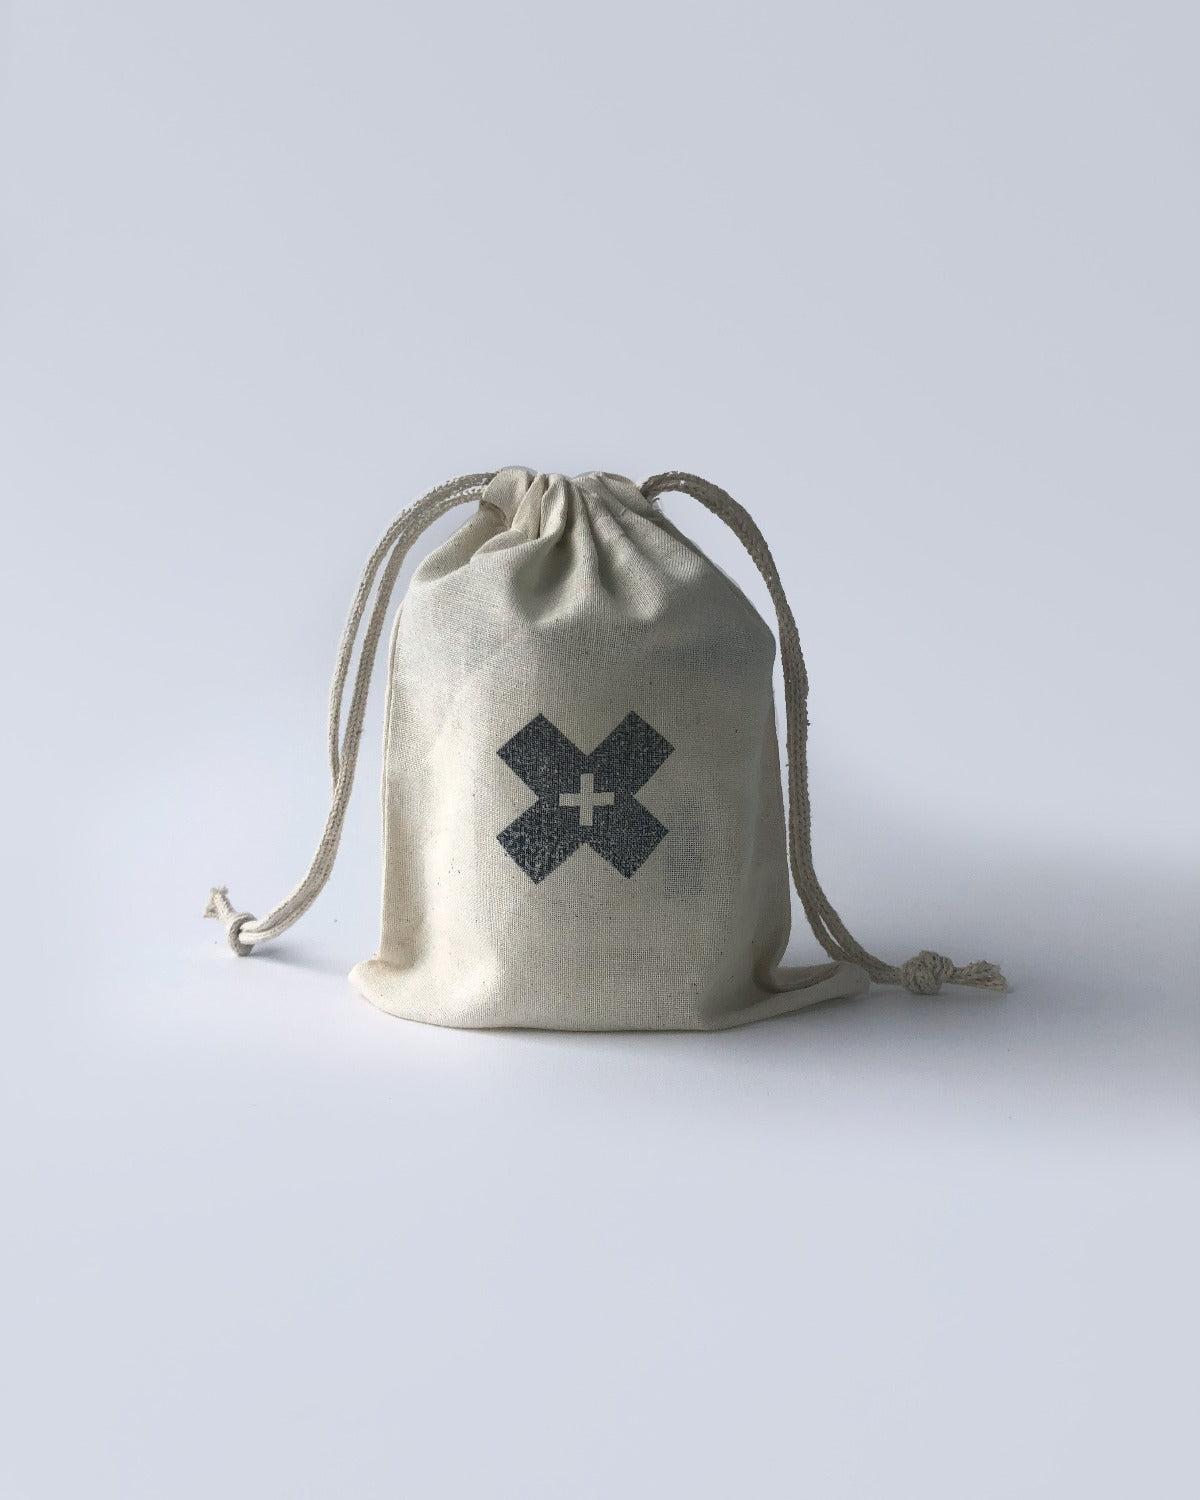 Product image of Reusable Cotton Drawstring Bag. The bag is a beige cotton with a large black X in the middle with a tiny cross in the X. There are strings coming out of either side of the top and the bag is closed tight. 